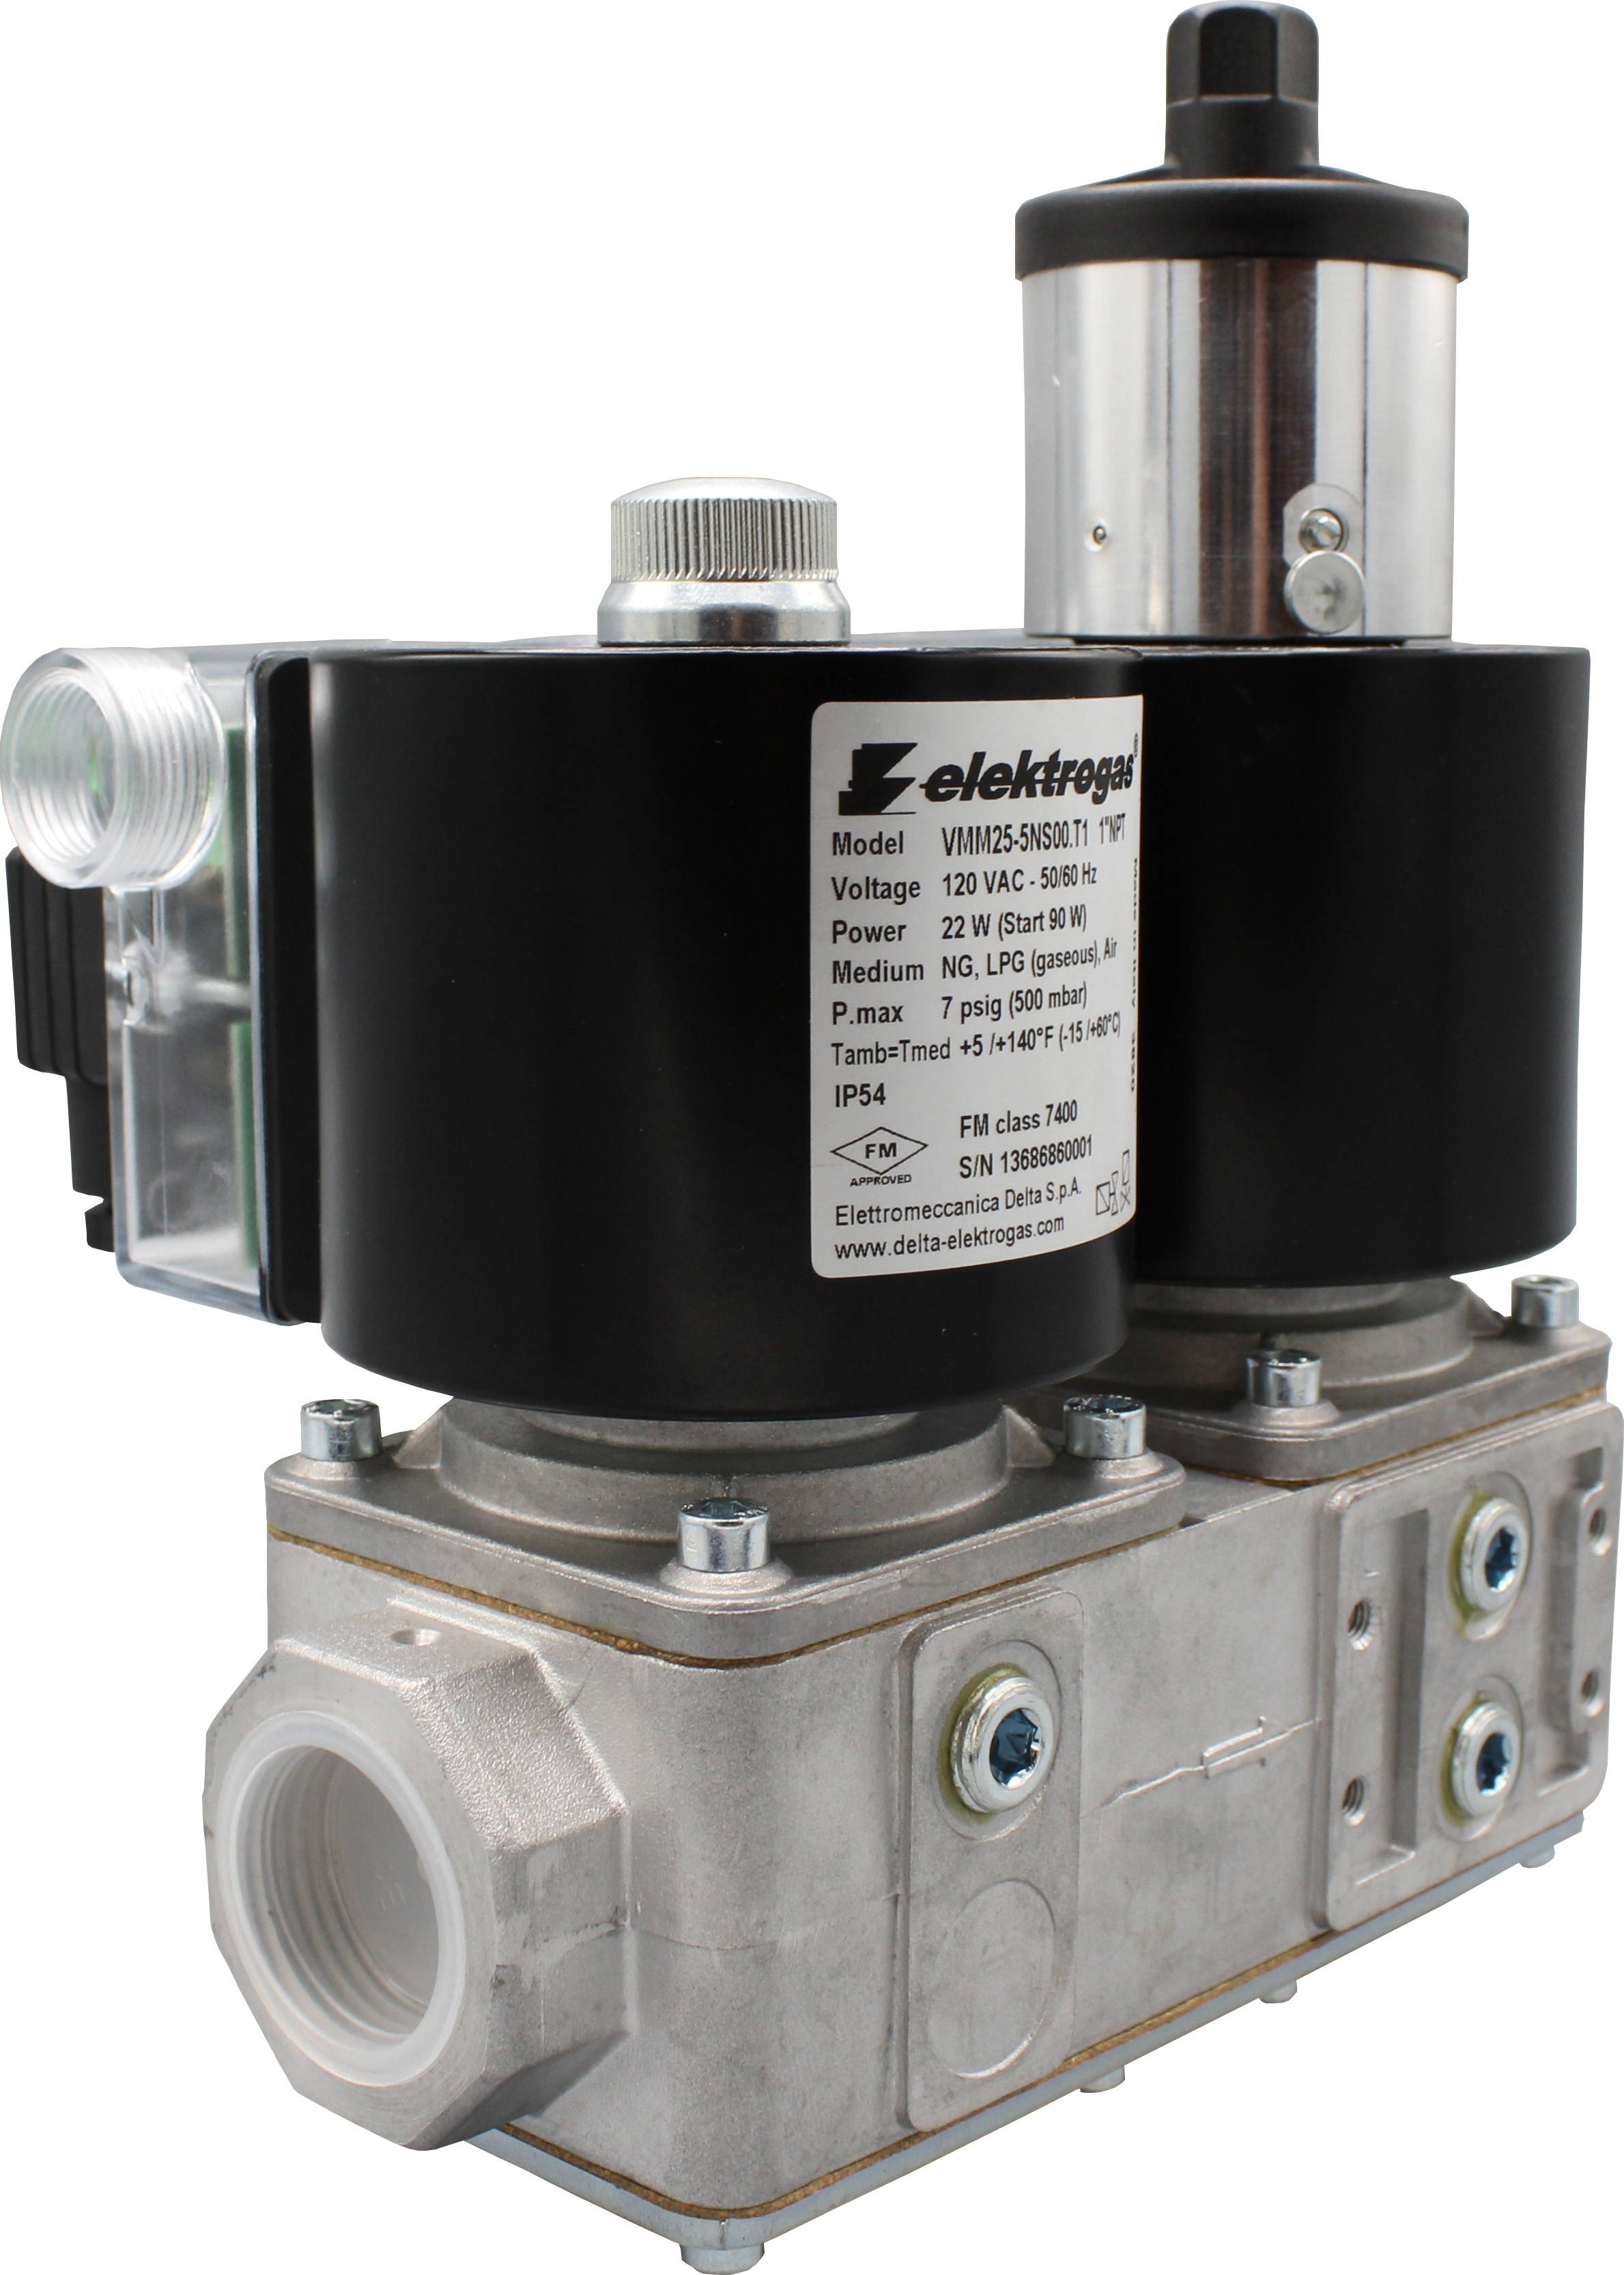 FAQ: What is a double solenoid valve?